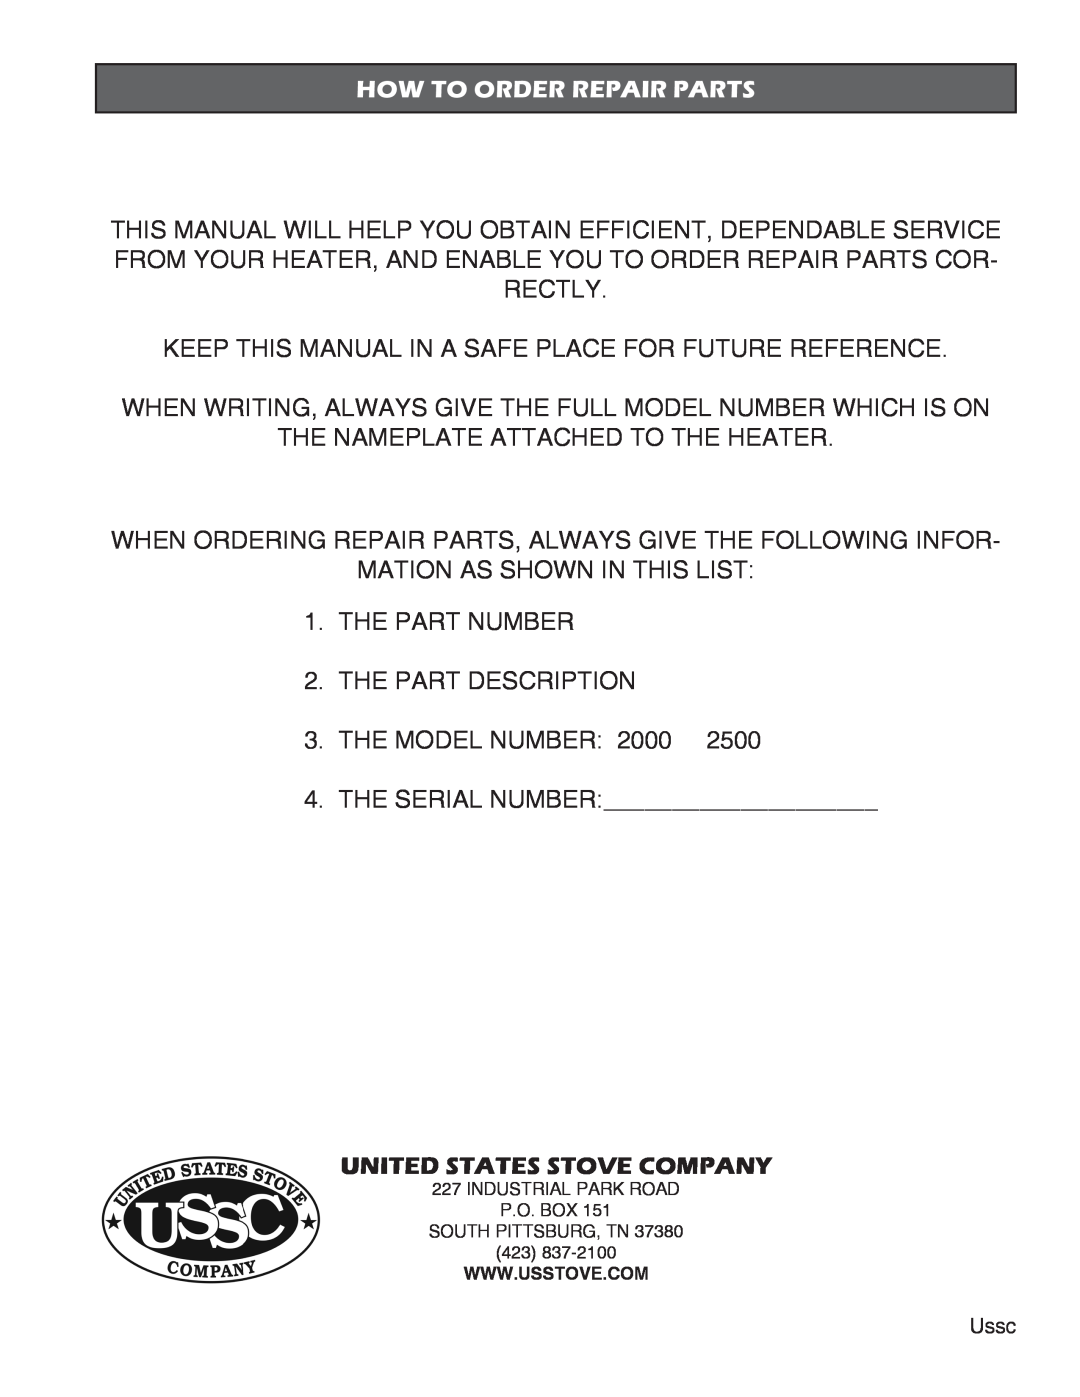 United States Stove 2000, 2500 instruction manual United States Stove Company, How To Order Repair Parts 